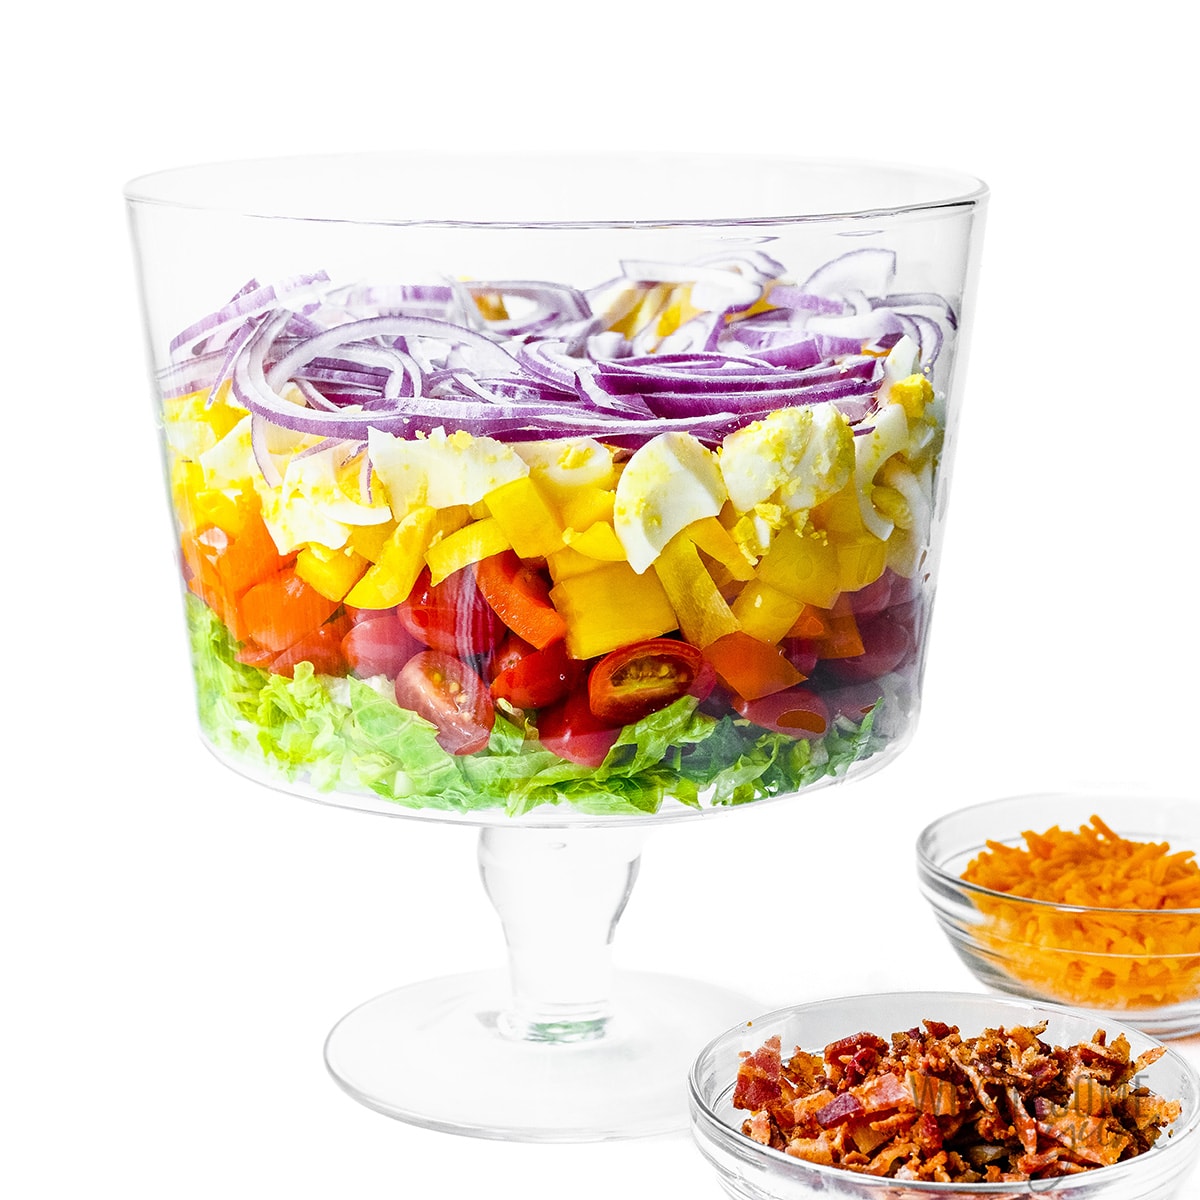 Vegetables are layered in a small bowl.